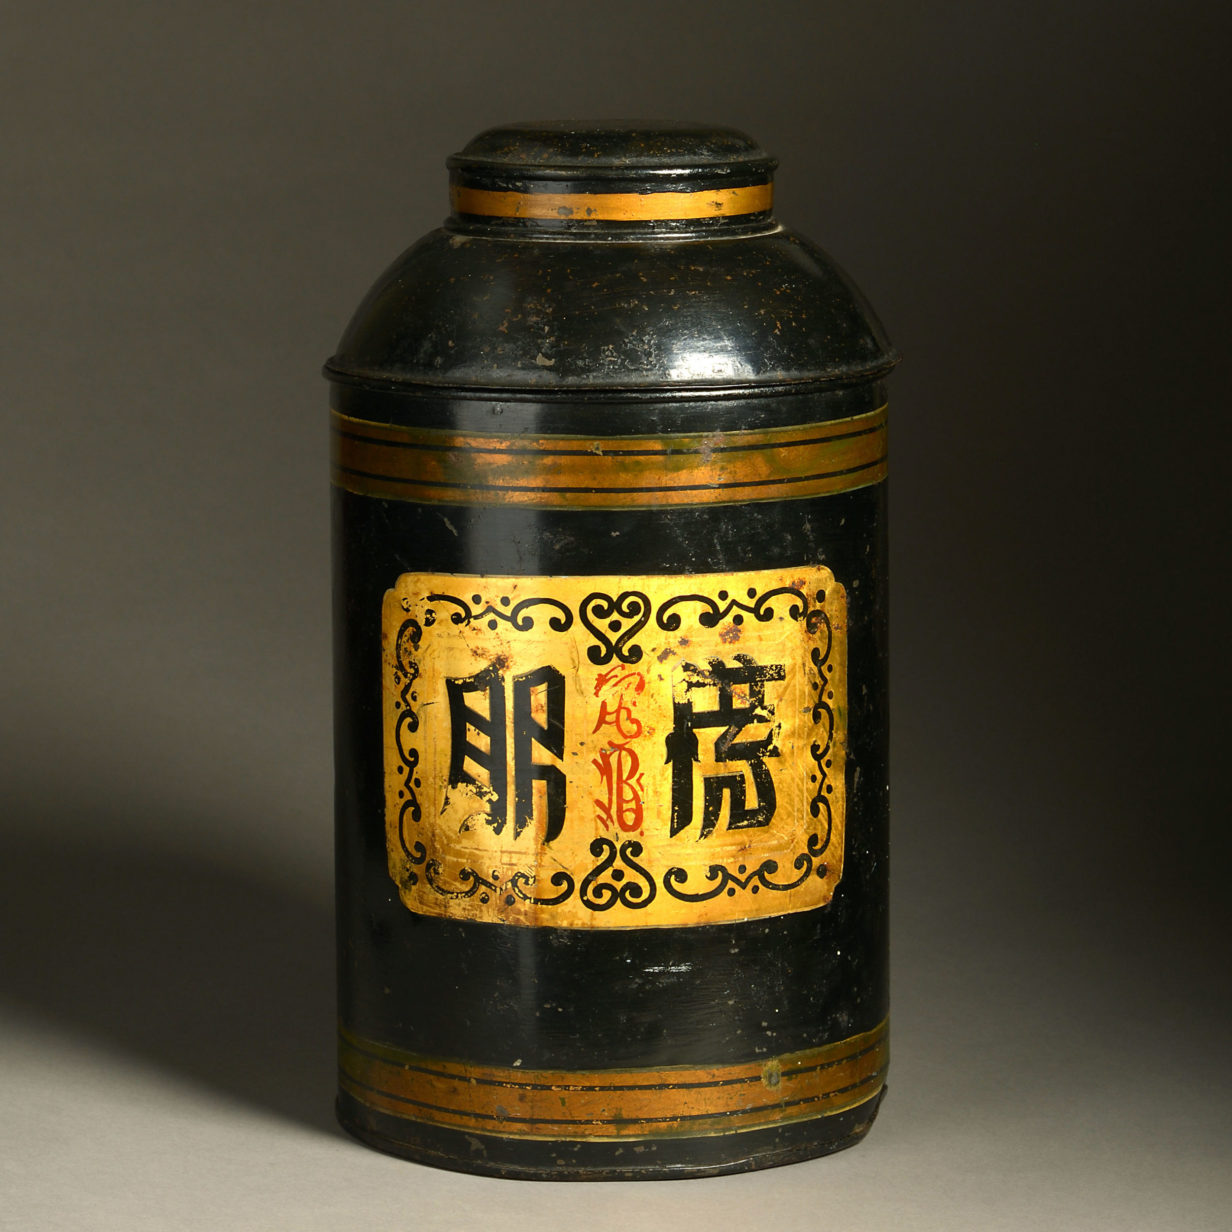 A 19th century black painted tole tea canister